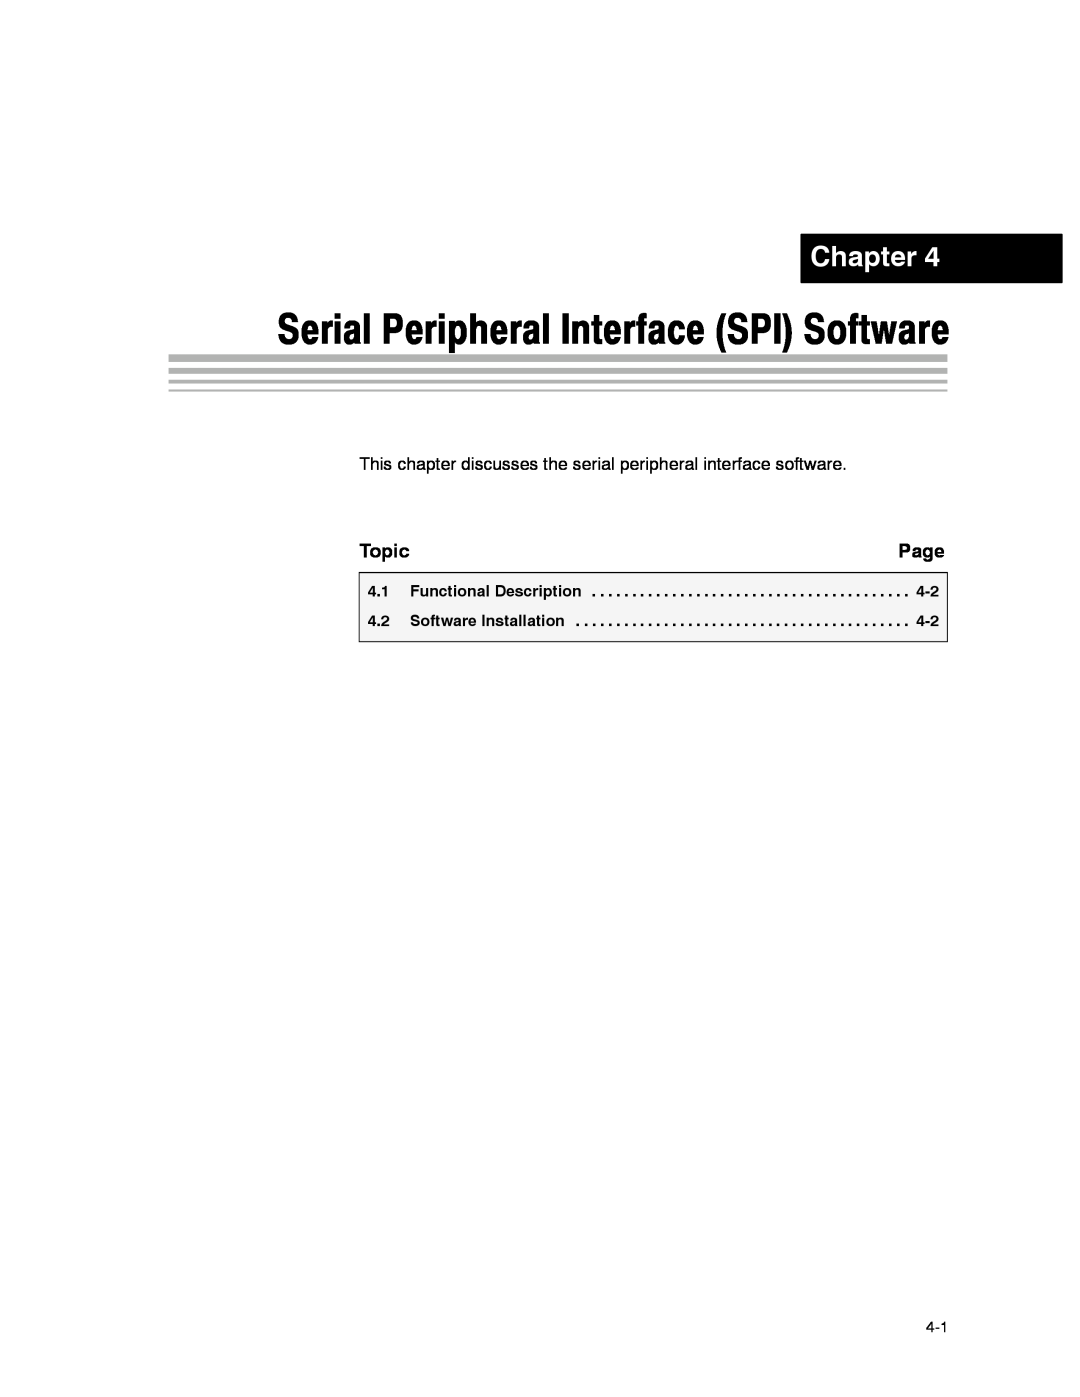 Texas Instruments CDCM7005 manual Serial Peripheral Interface SPI Software, Chapter, Page, Topic 